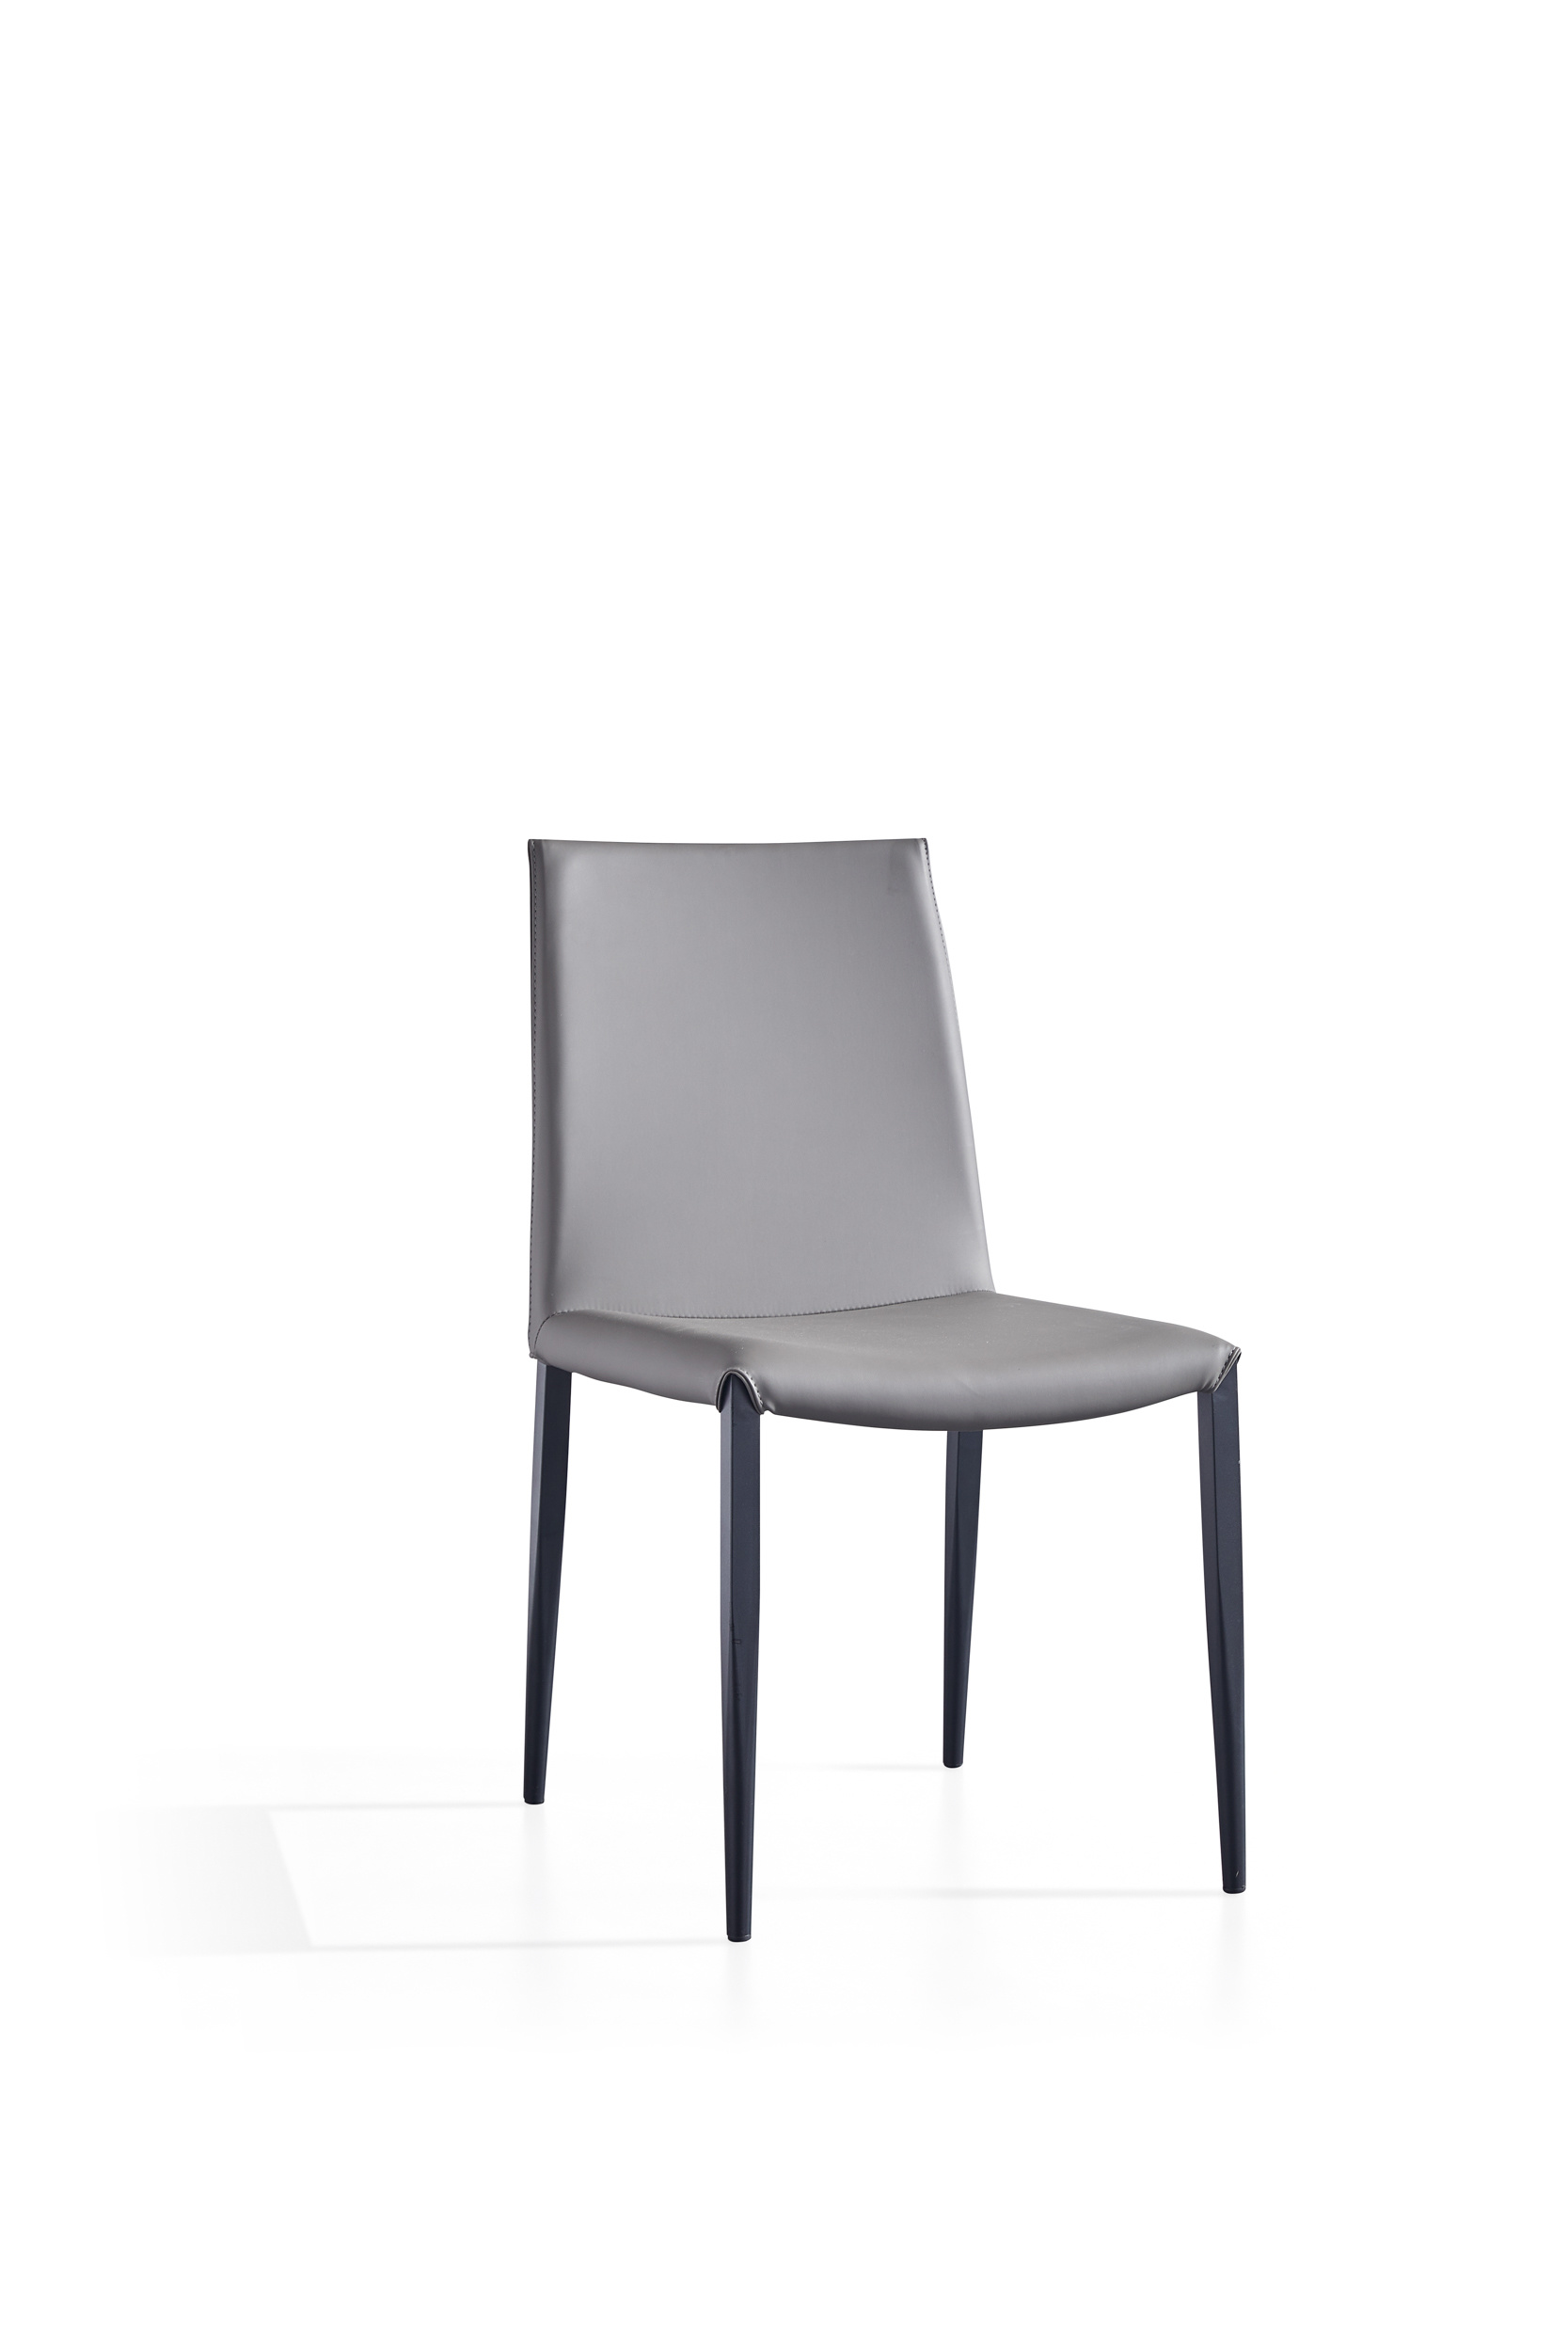 Fabric Hotel Home Dining Room Stainless steel Chair